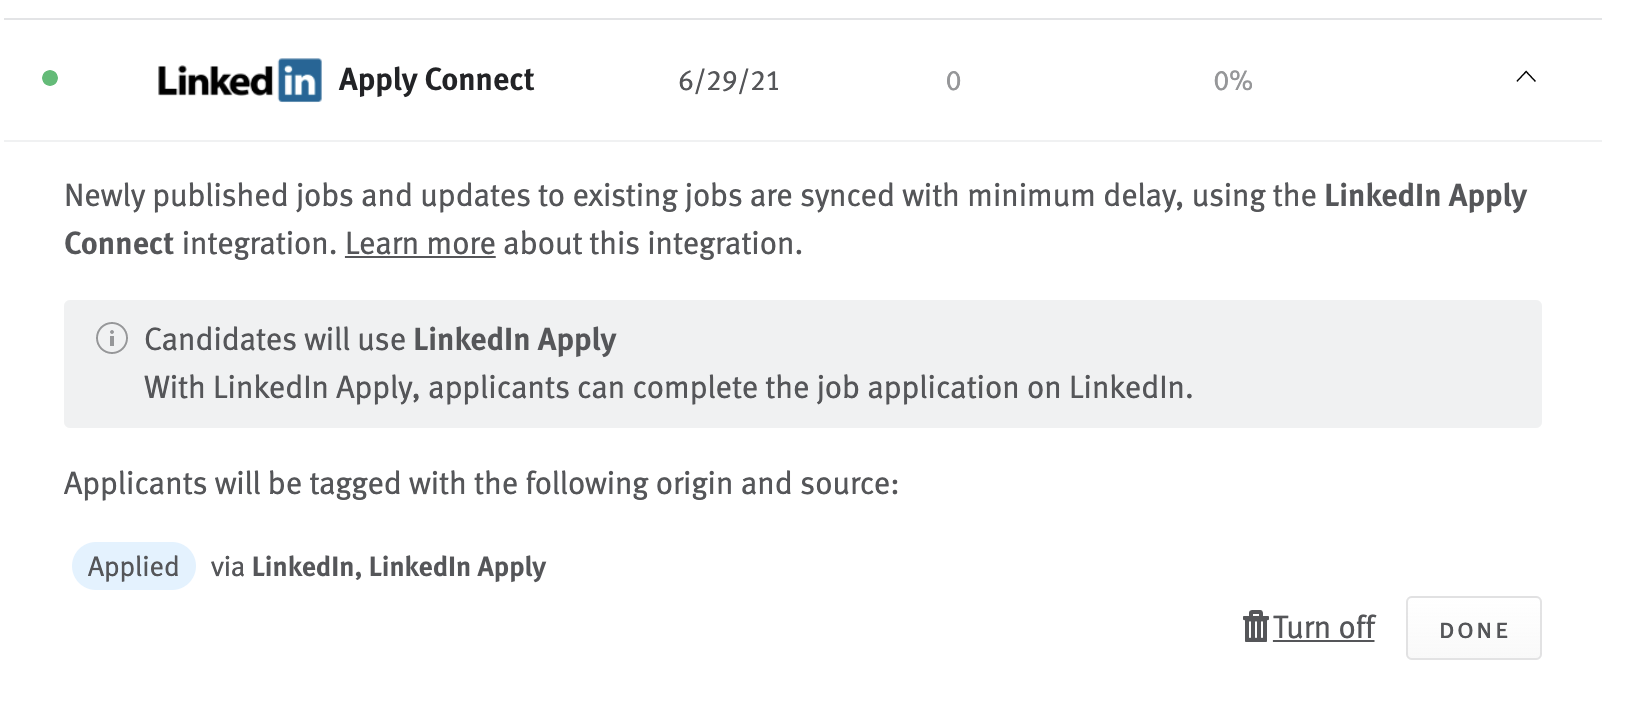 LinkedIn Apply Connect listing on Lever posting